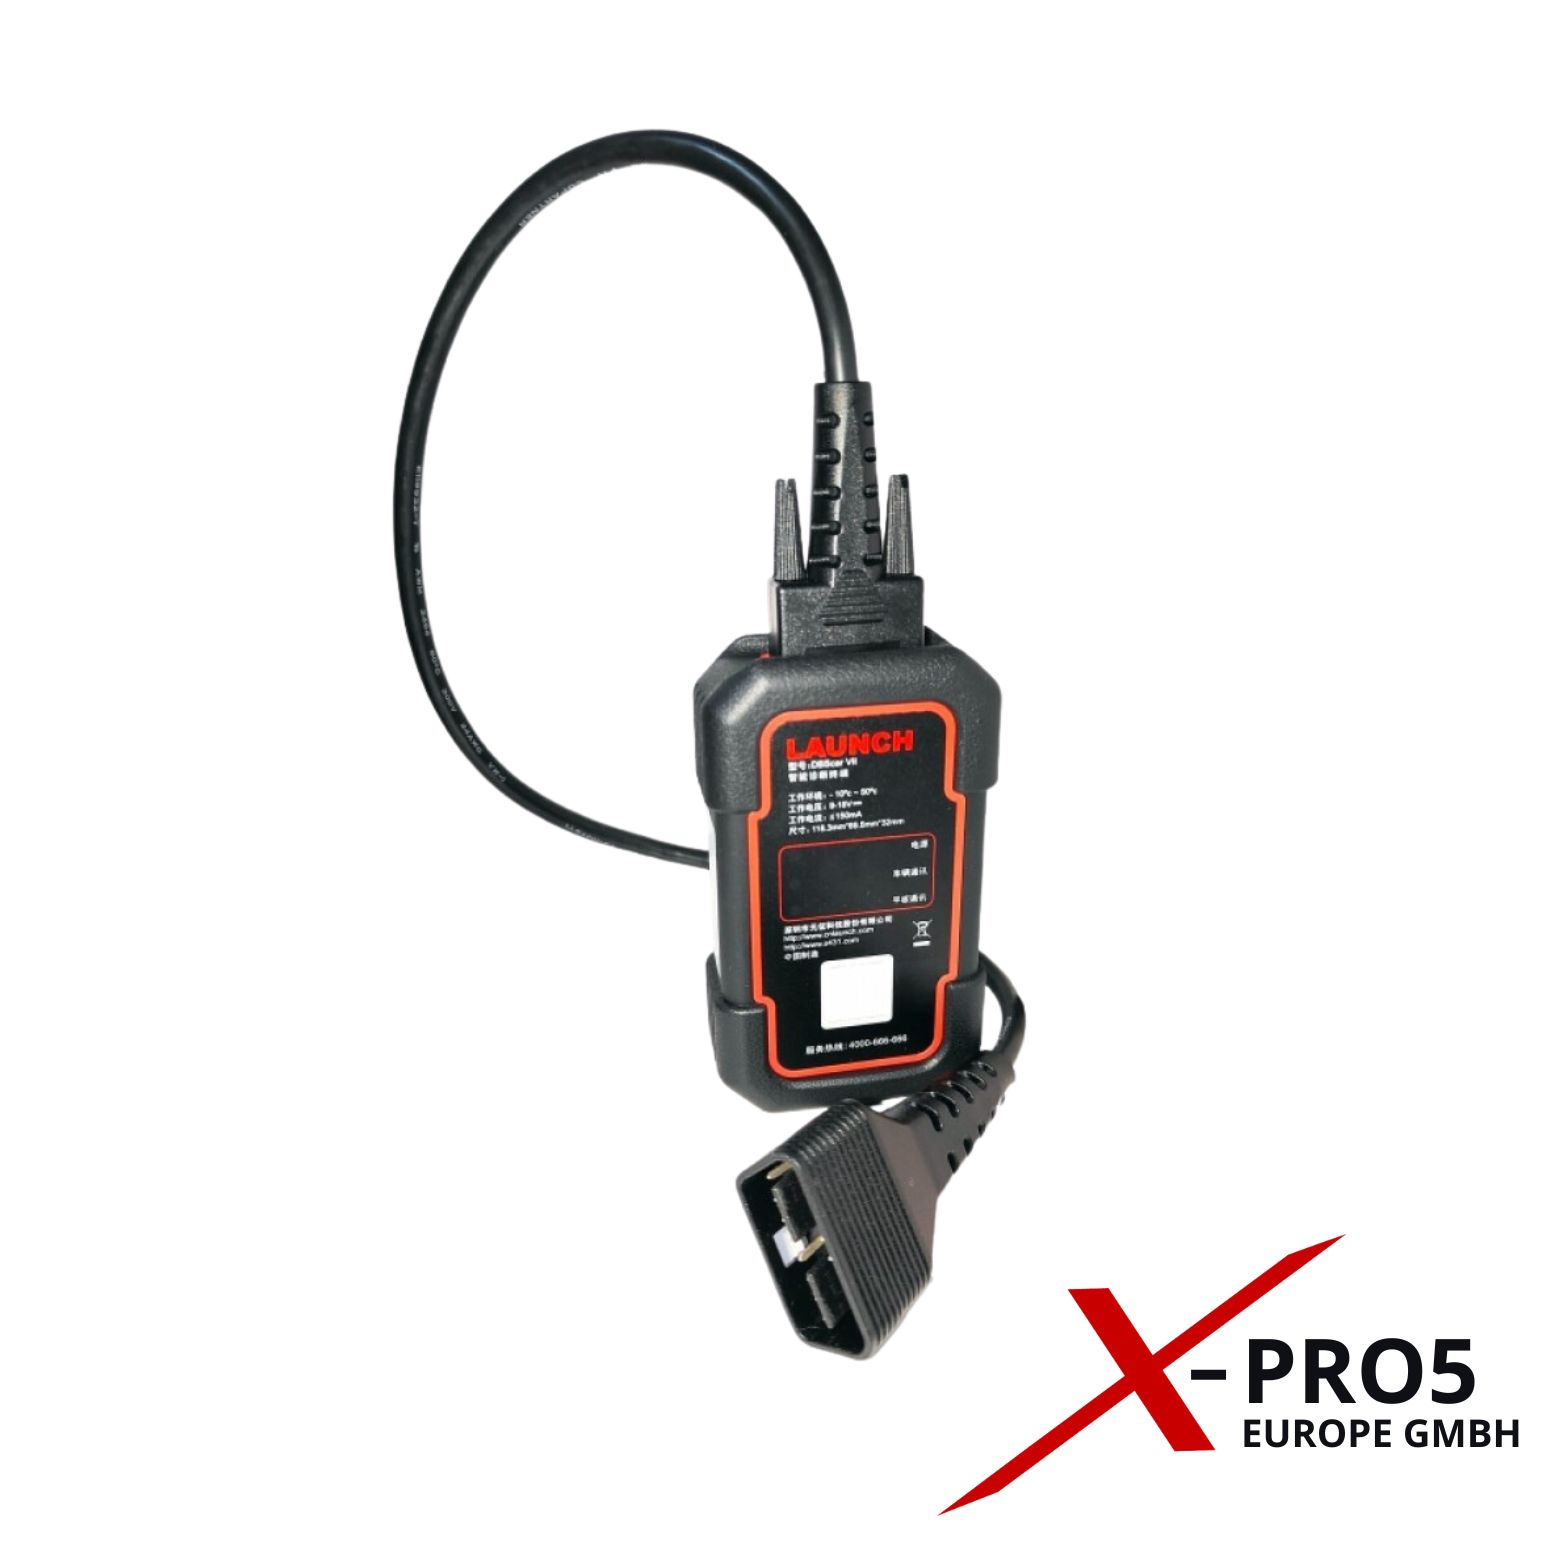 Diagnostics with Launch X431 DBScar5 Bluetooth Adapter - XPRO5